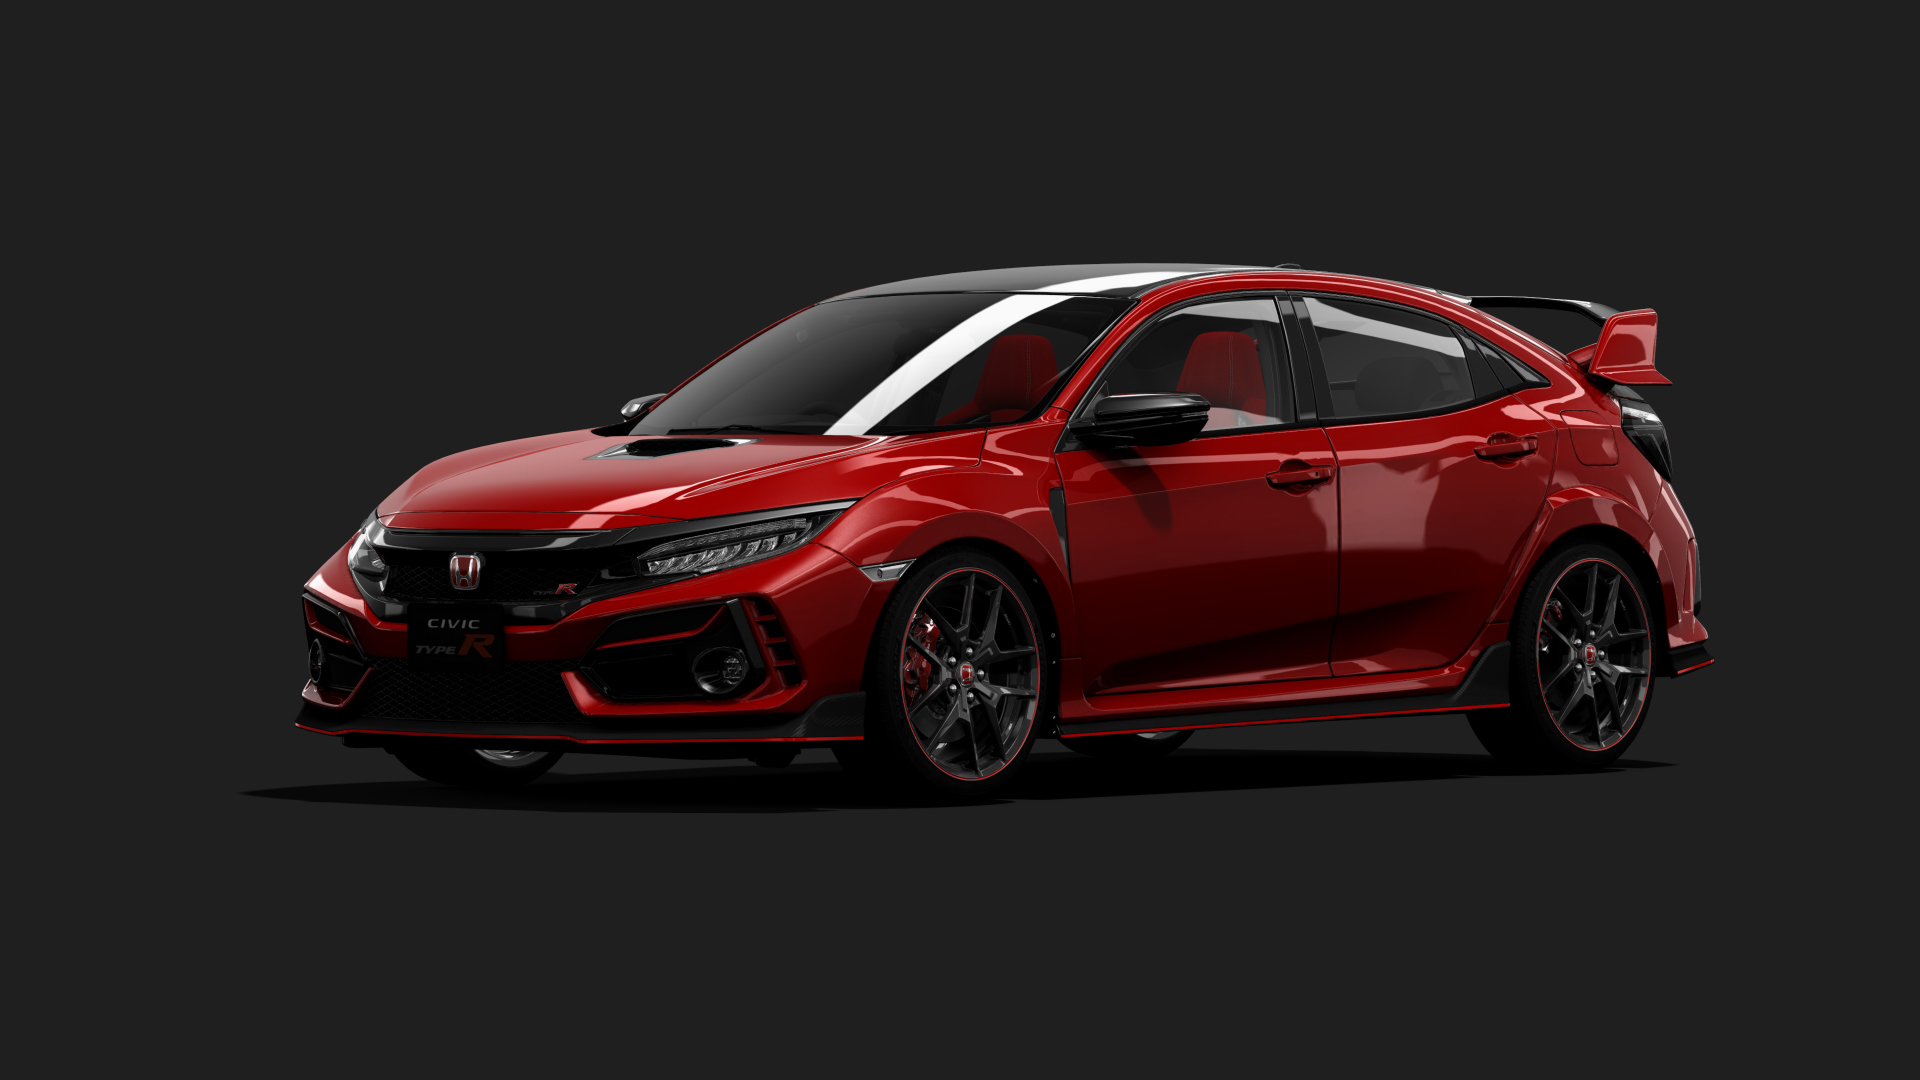 Honda Civic Type R FK8 Limited Edition, skin 04-Flame Red